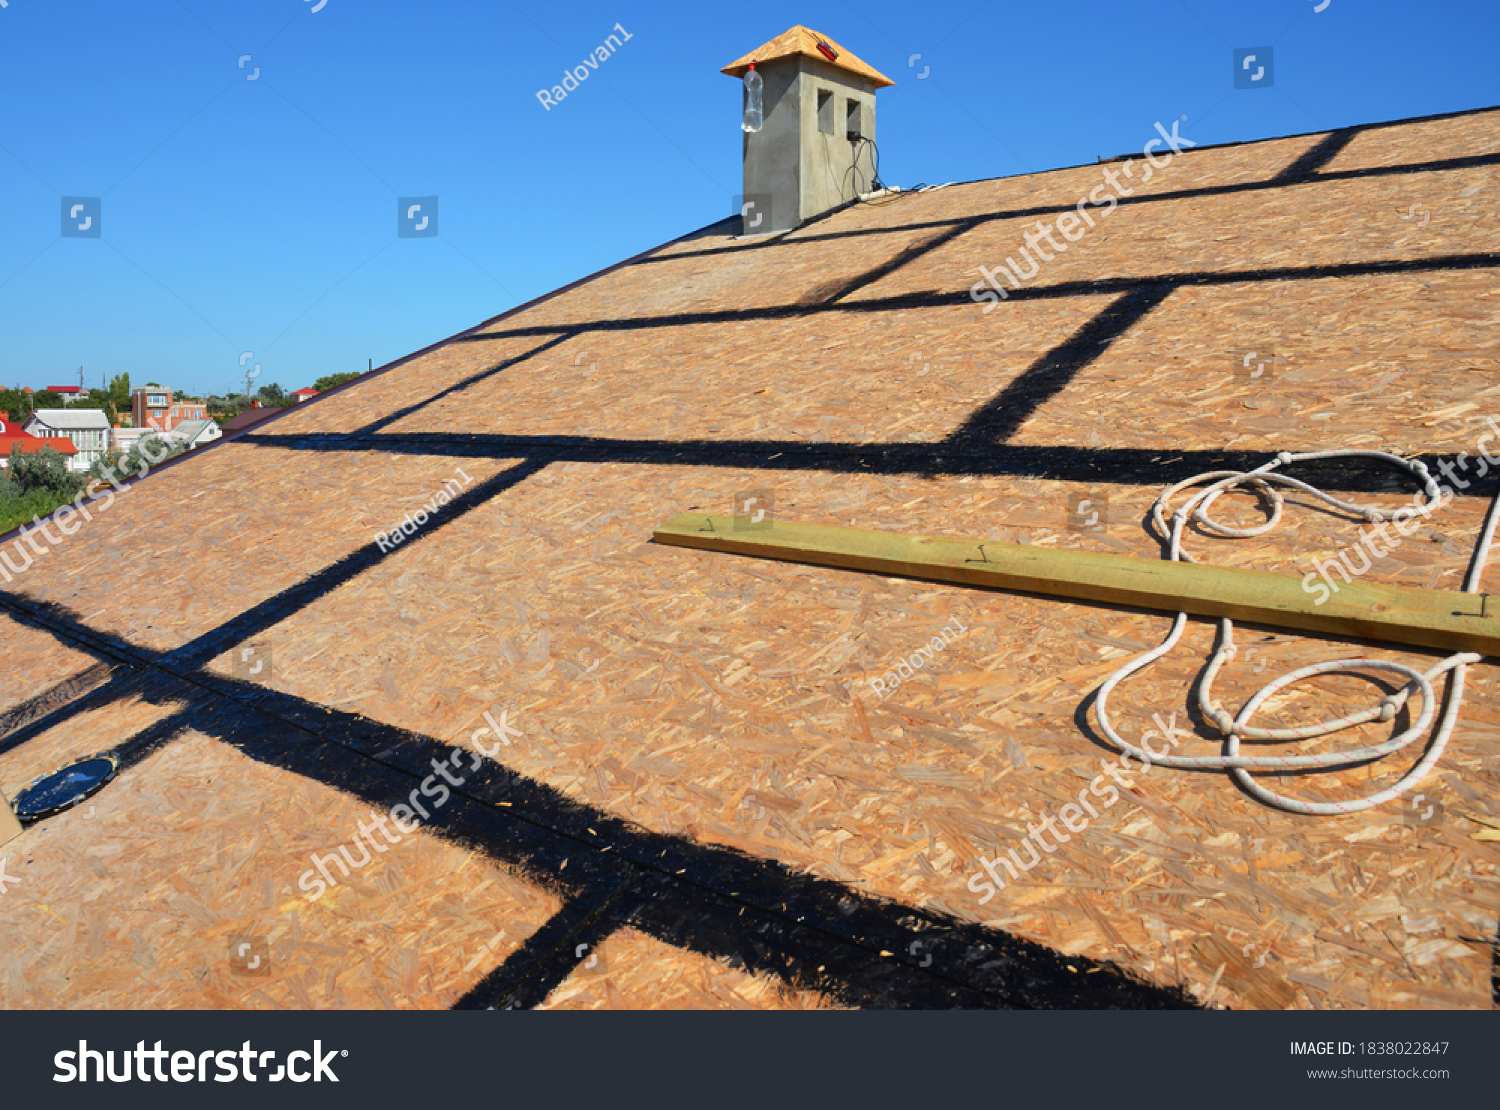 A close-up on an incomplete roofing construction on the stage of roof sheathing with self-adhering rubberized asphalt flexible flashings installed. #1838022847